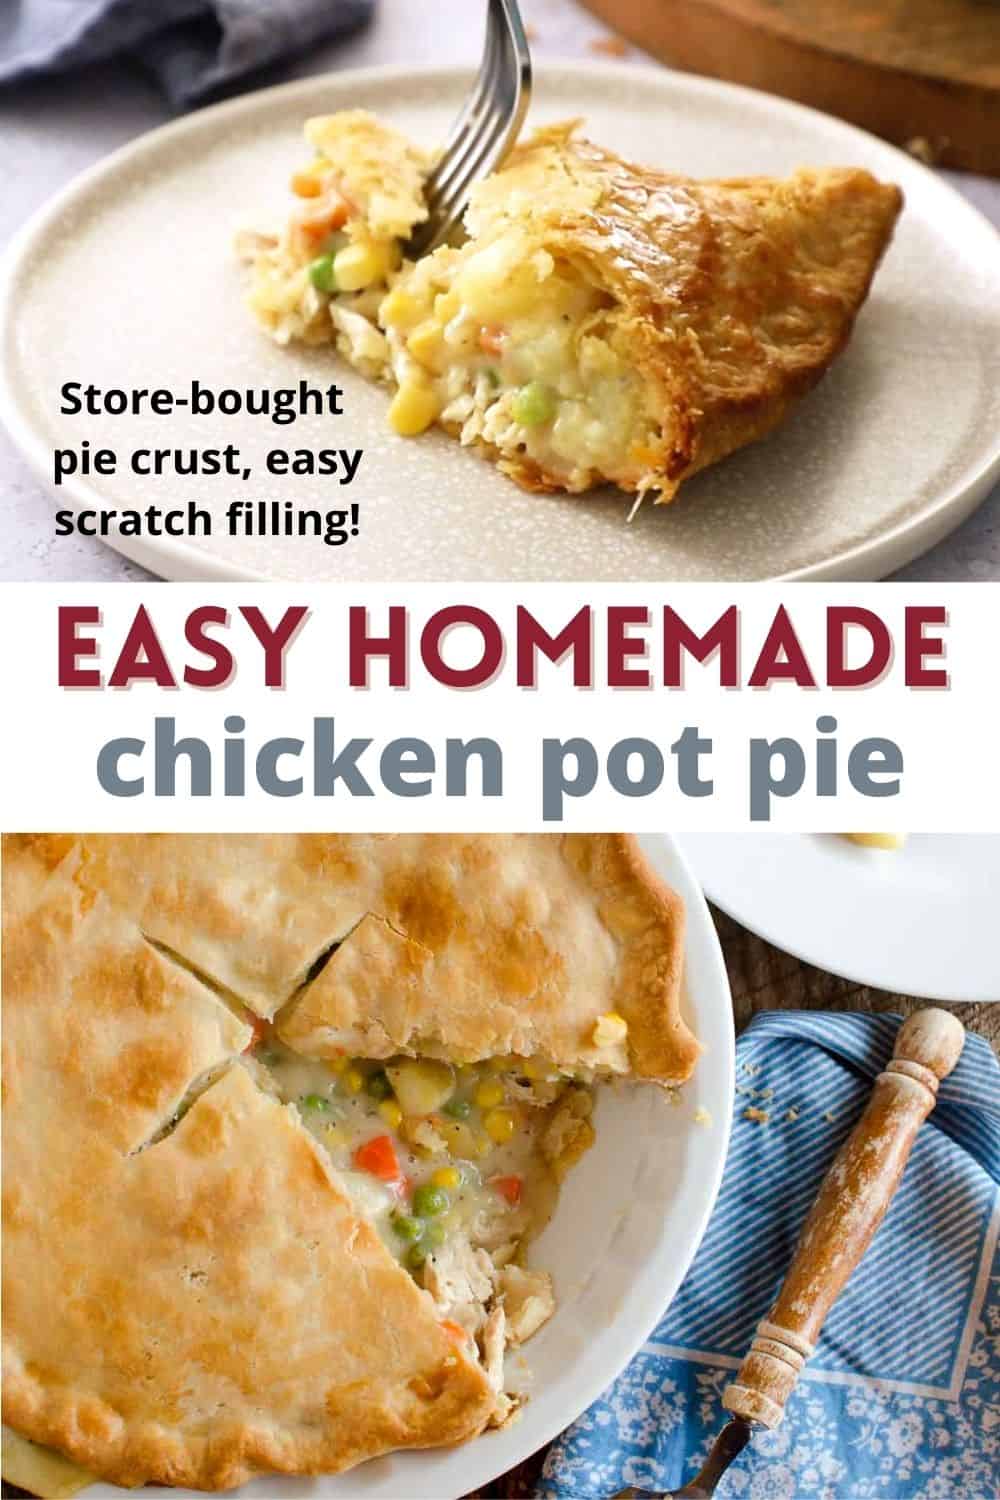 The key for this easy chicken pot pie is refrigerated pie crust dough. The filling in this pot pie recipe is homemade but simple -- even without cream of chicken soup!